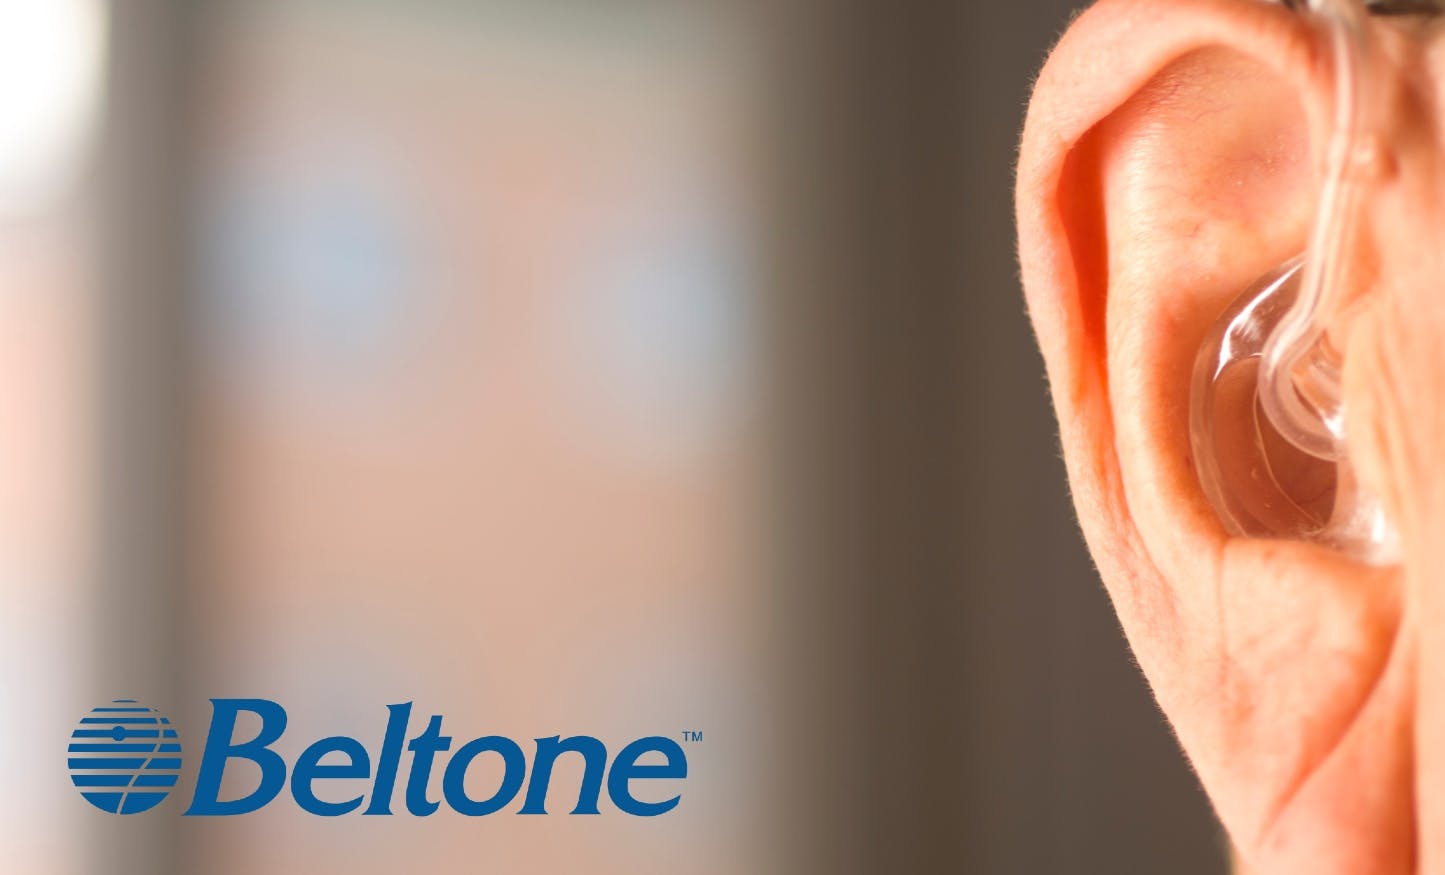 Beltone Hearing Aids: Tailored Only for You